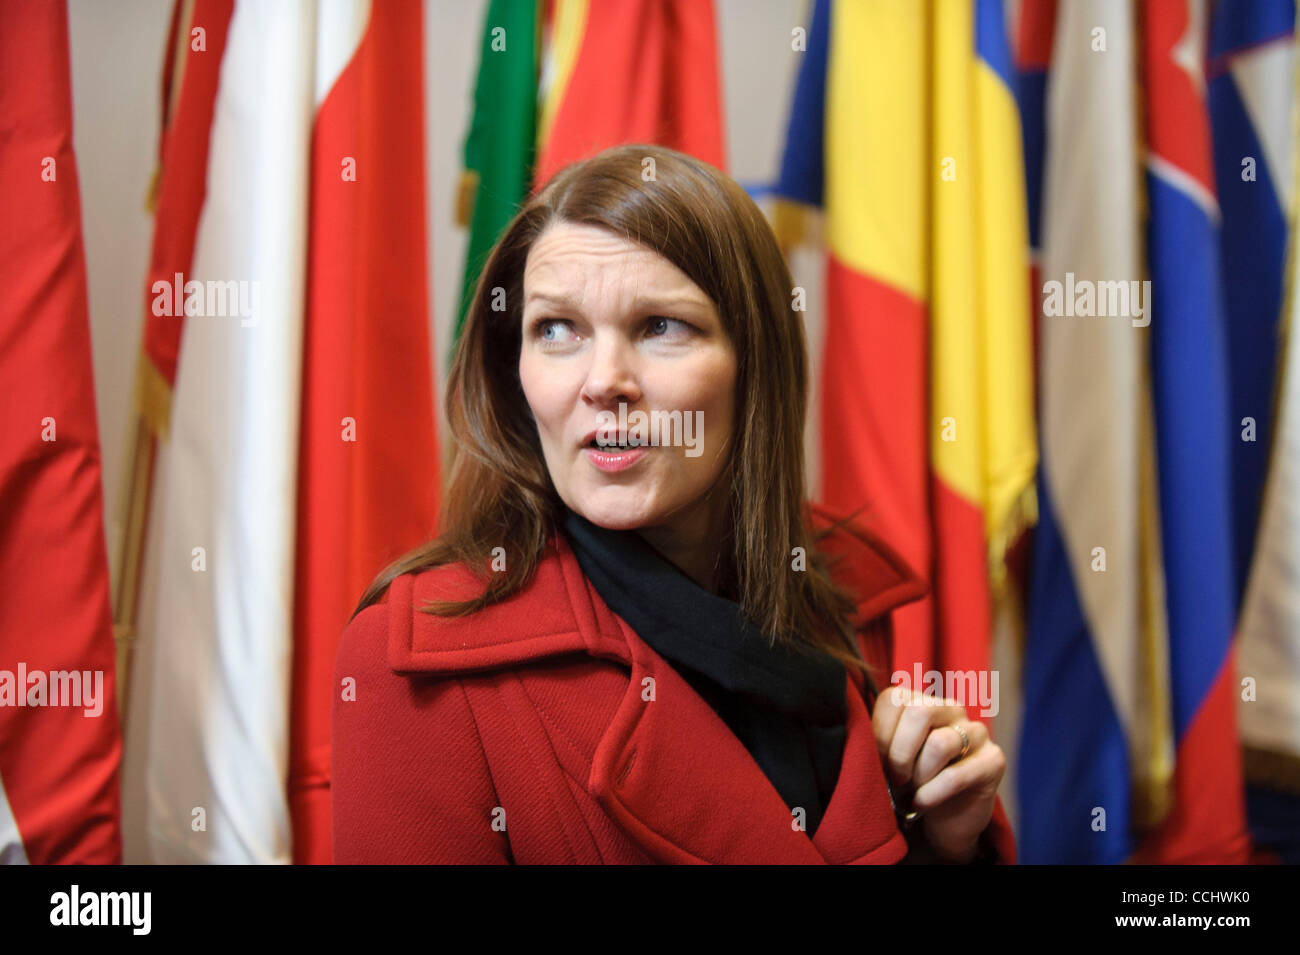 Dec. 16, 2010 - Brussels, BXL, Belgium - Finnish Prime Minister Mari Kiviniemi arrives  prior to the  European Summit  at European Councill headquarters in  Brussels, Belgium on 2010-12-16 Leaders of European Union member states gather to decide on changing The Lisbon Treaty. EU leaders  want to set Stock Photo